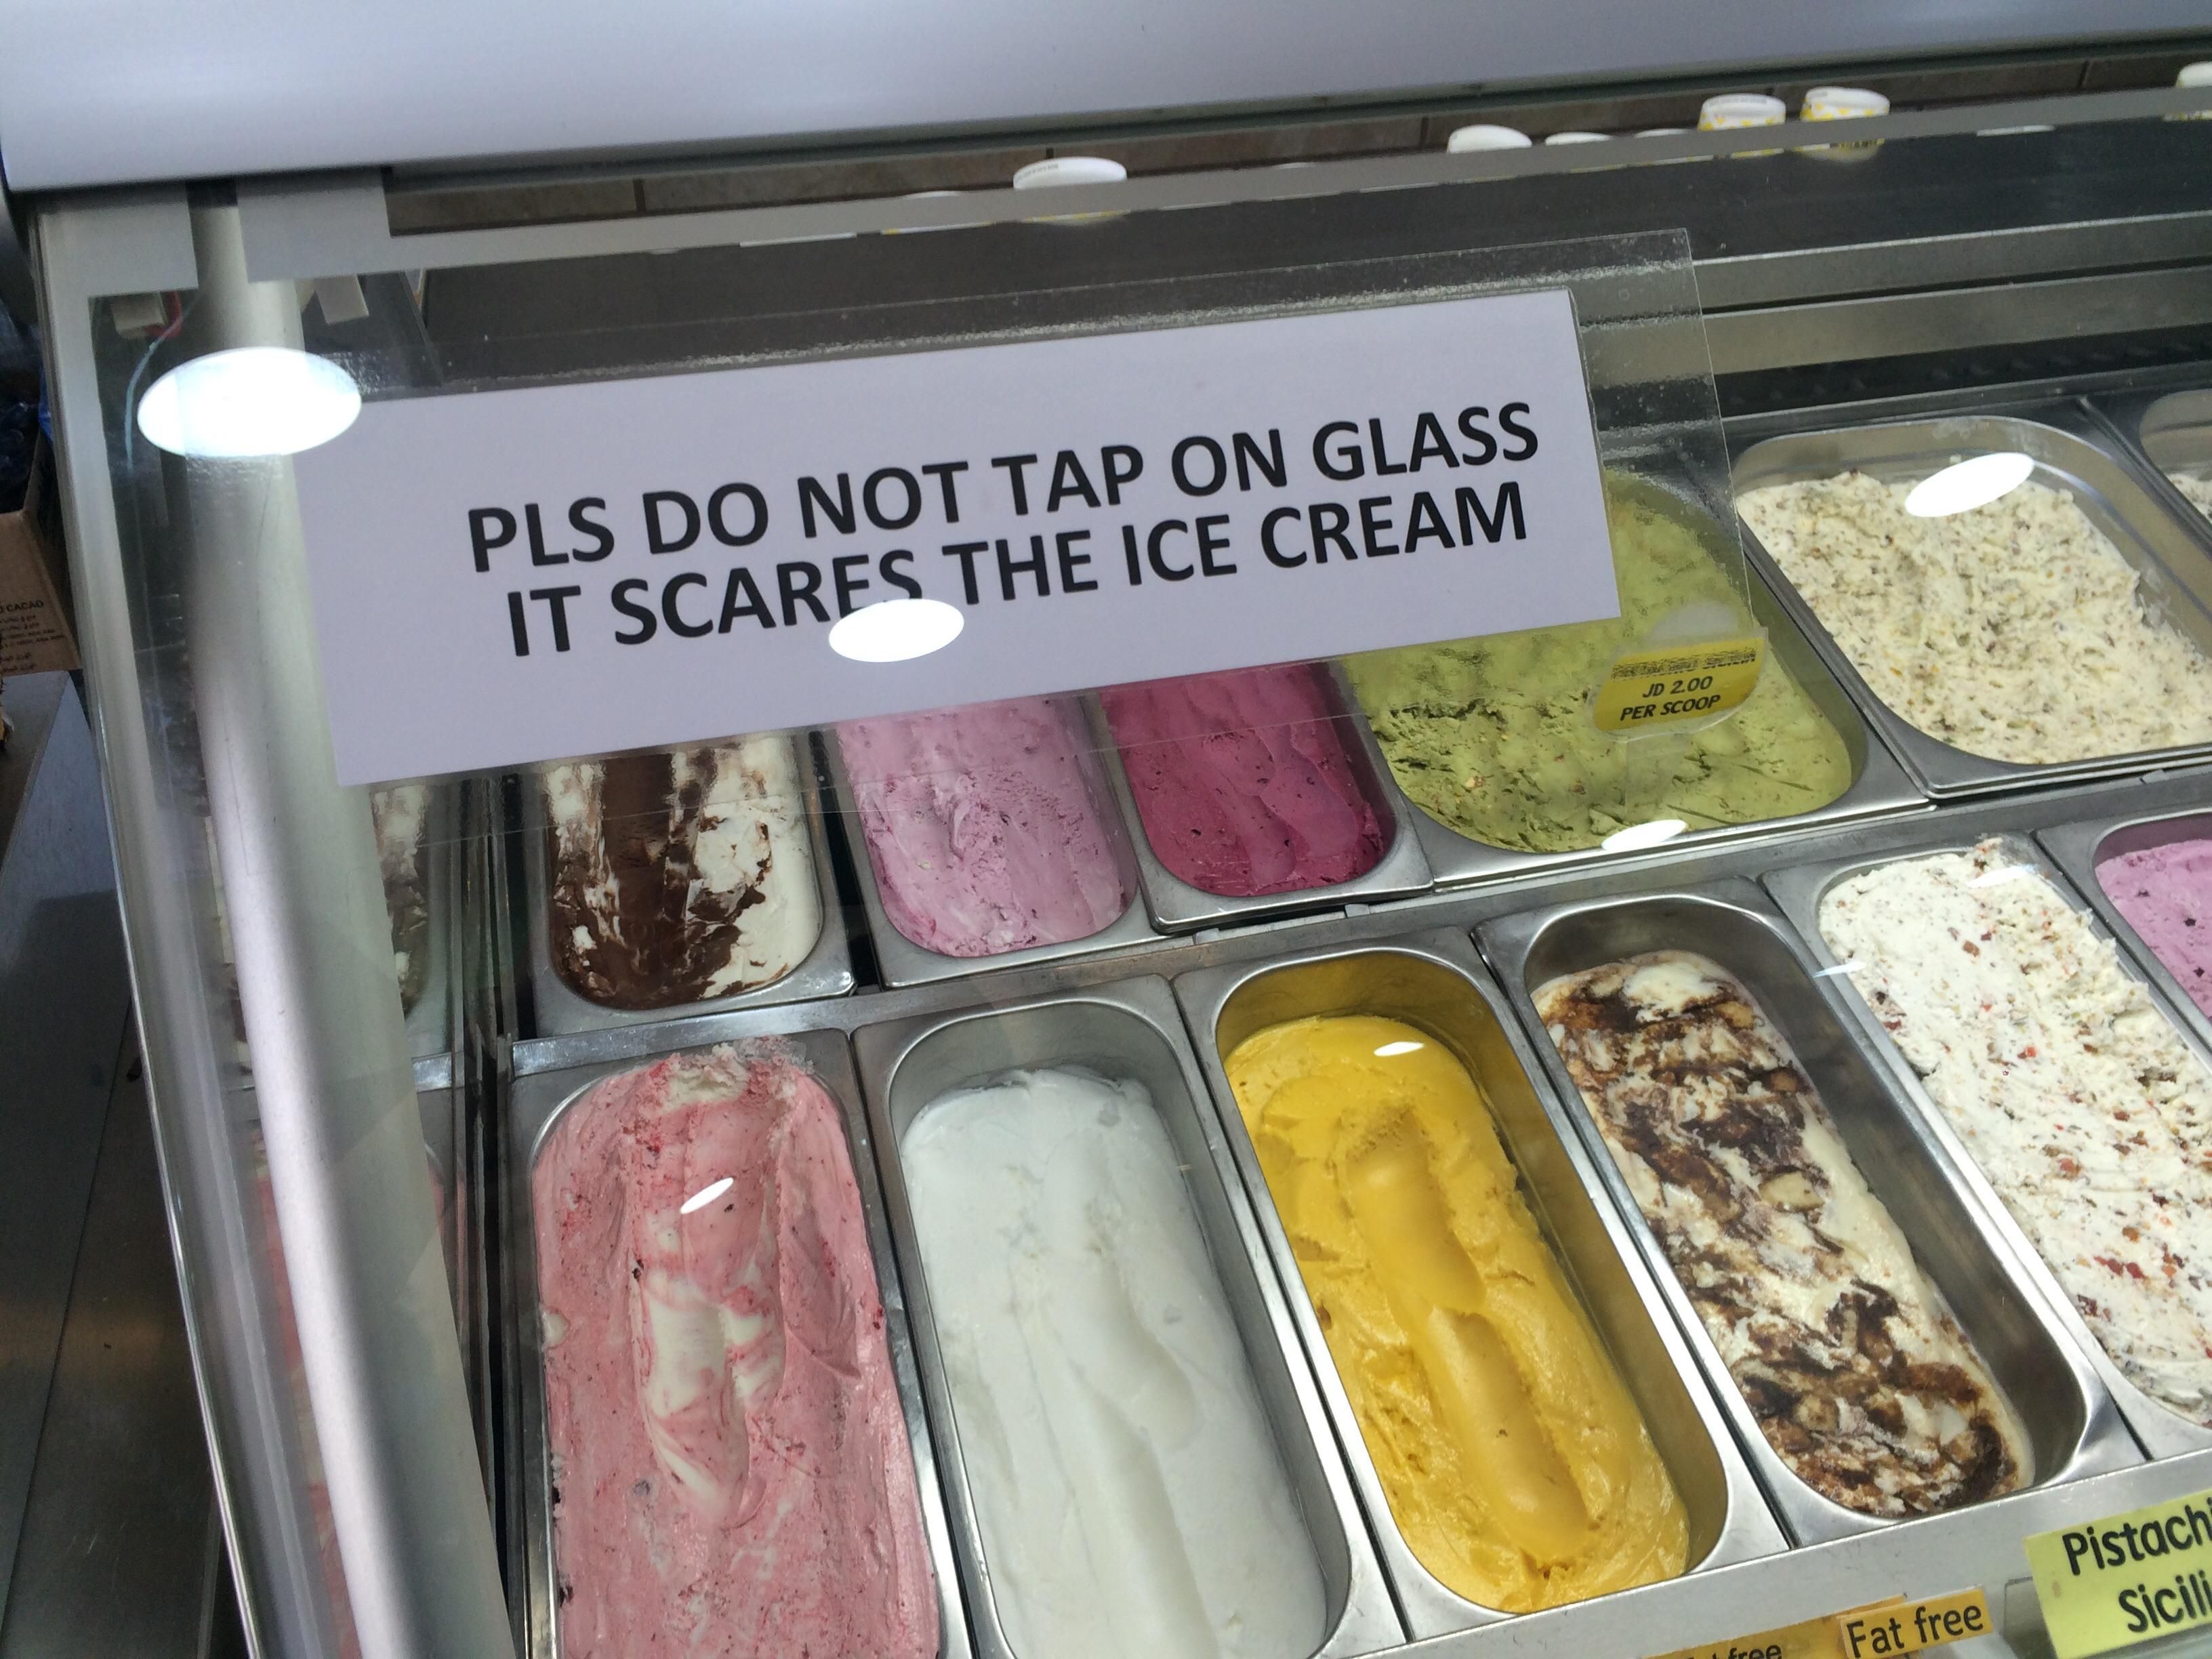 Saw this in an ice cream shop